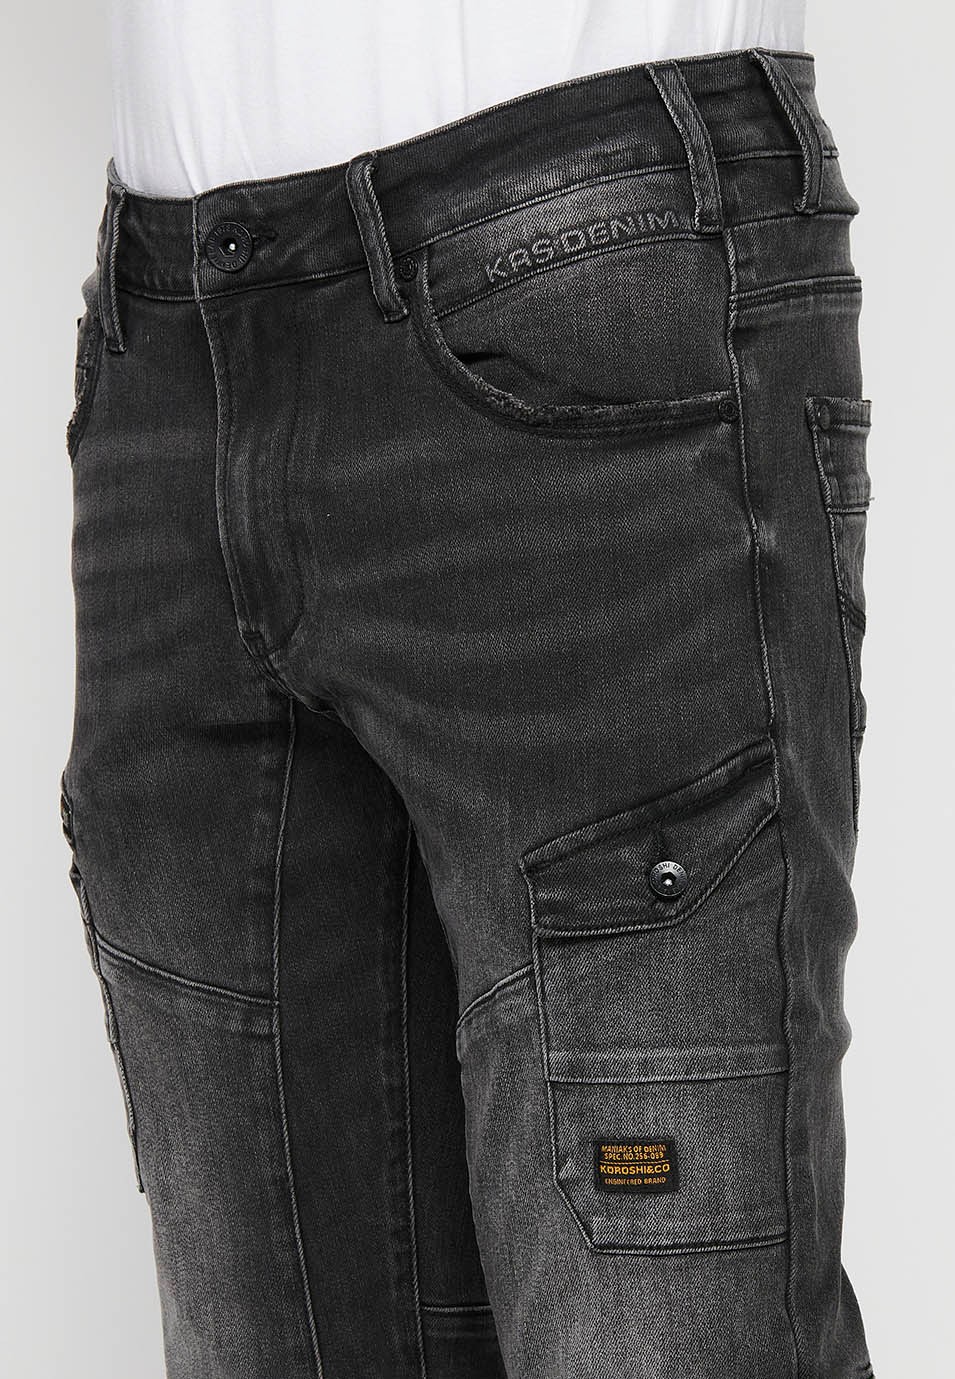 Long denim pants with front closure with zipper and button and pockets, two sides in Black for Men 6